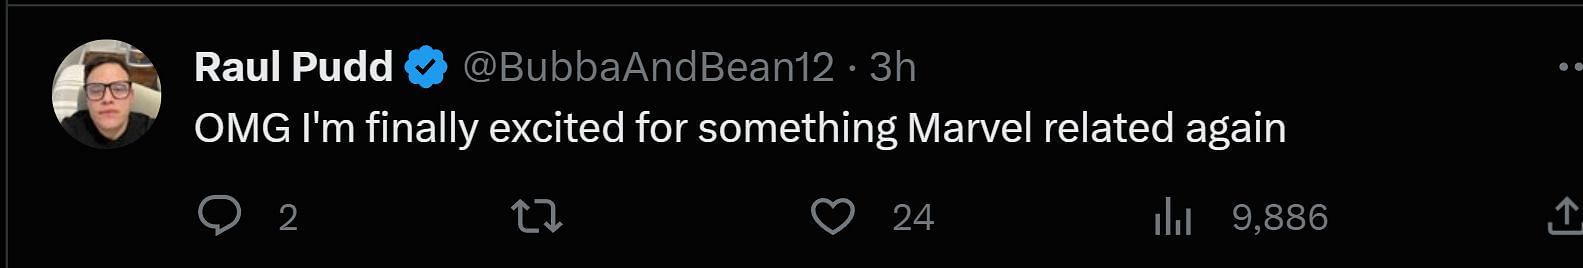 A tweet reply to Discussing Film&#039;s post about the upcoming MCU project (Image via Twitter)